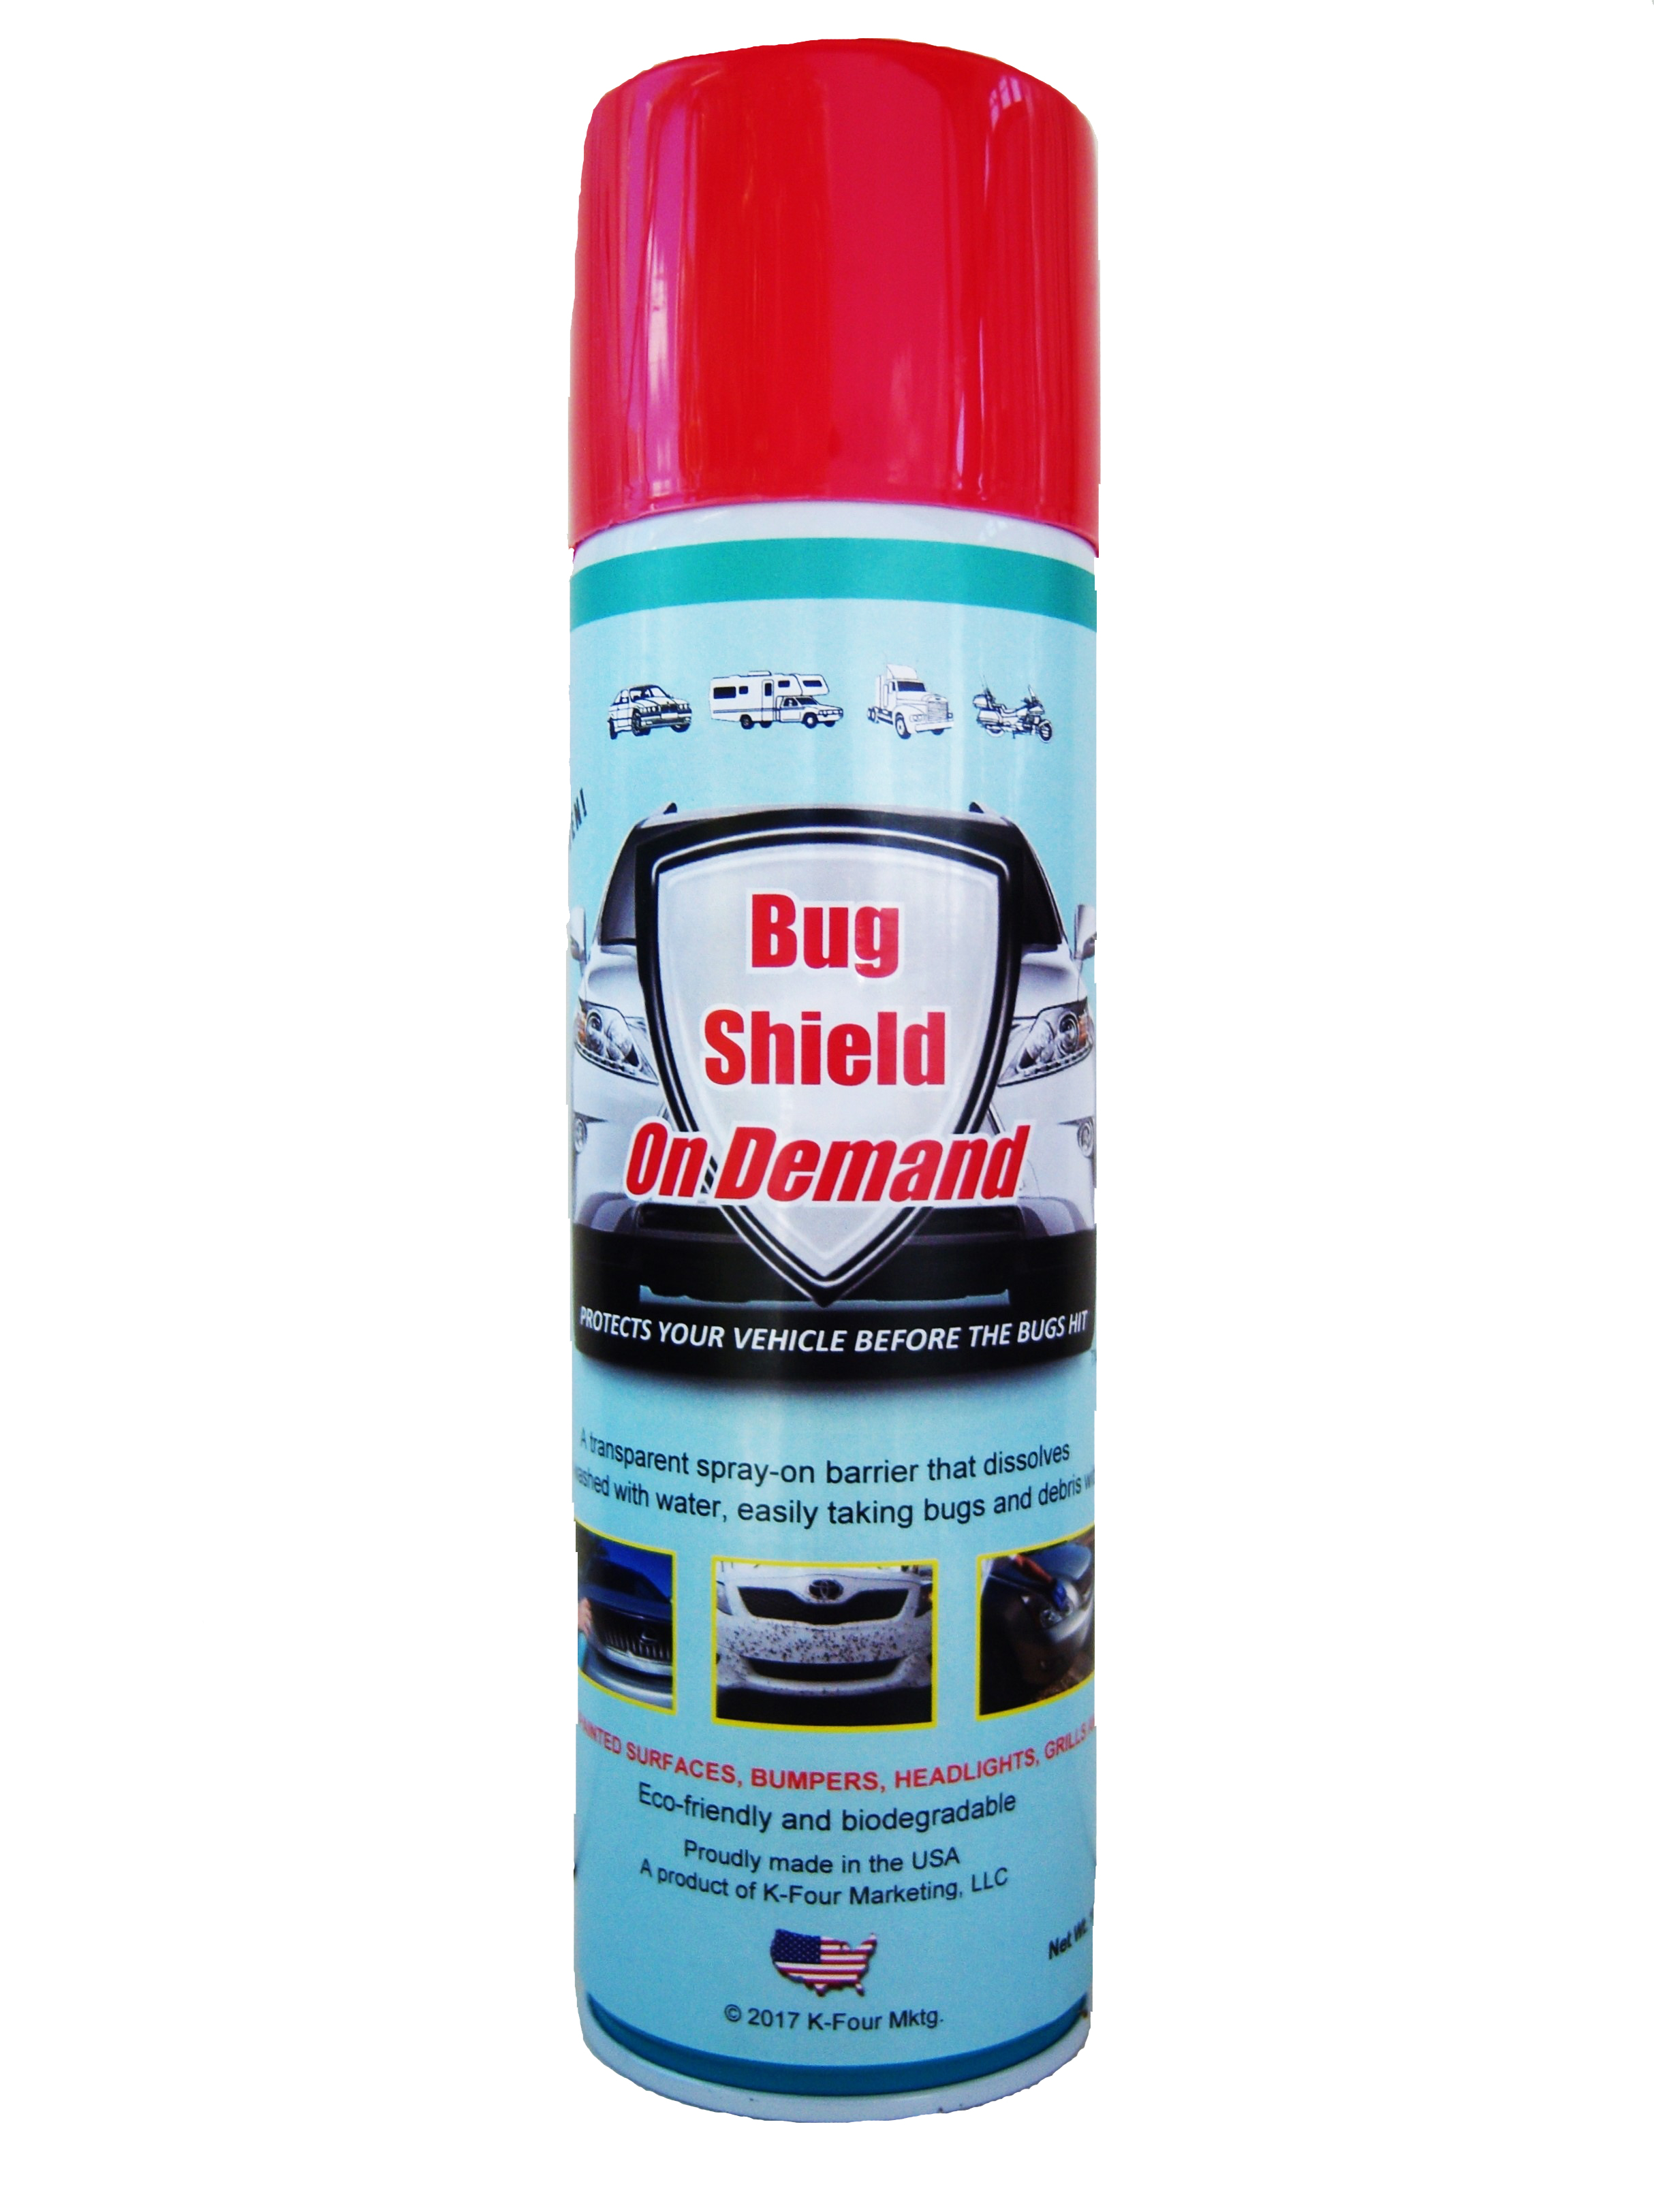 Bug spray for cars information